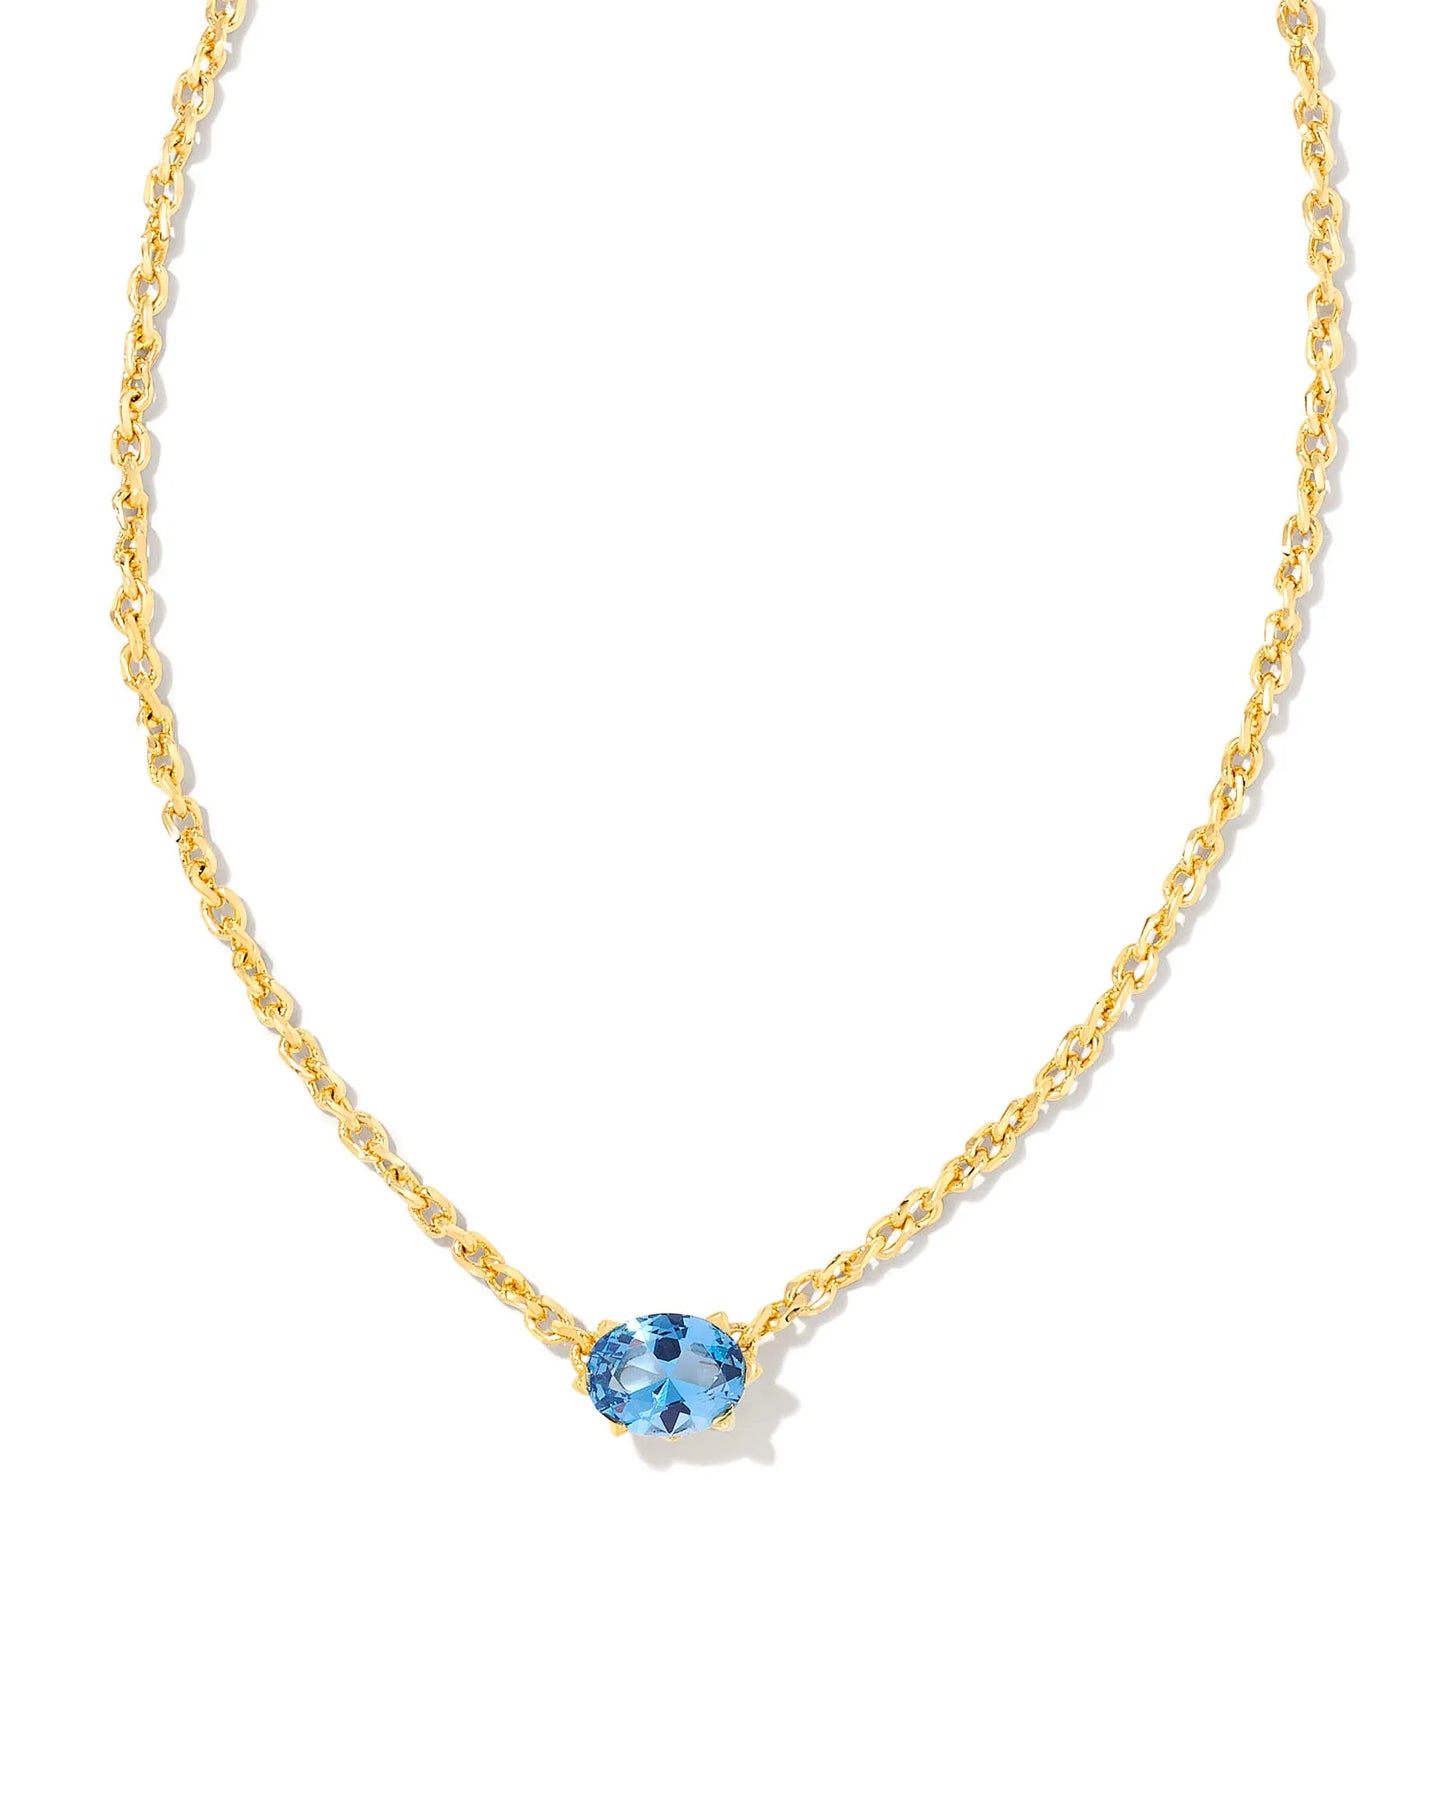 Kendra Scott Cailin Crystal Pendant Necklace Gold Blue Violet Crystal-Necklaces-Kendra Scott-N1941GLD-The Twisted Chandelier